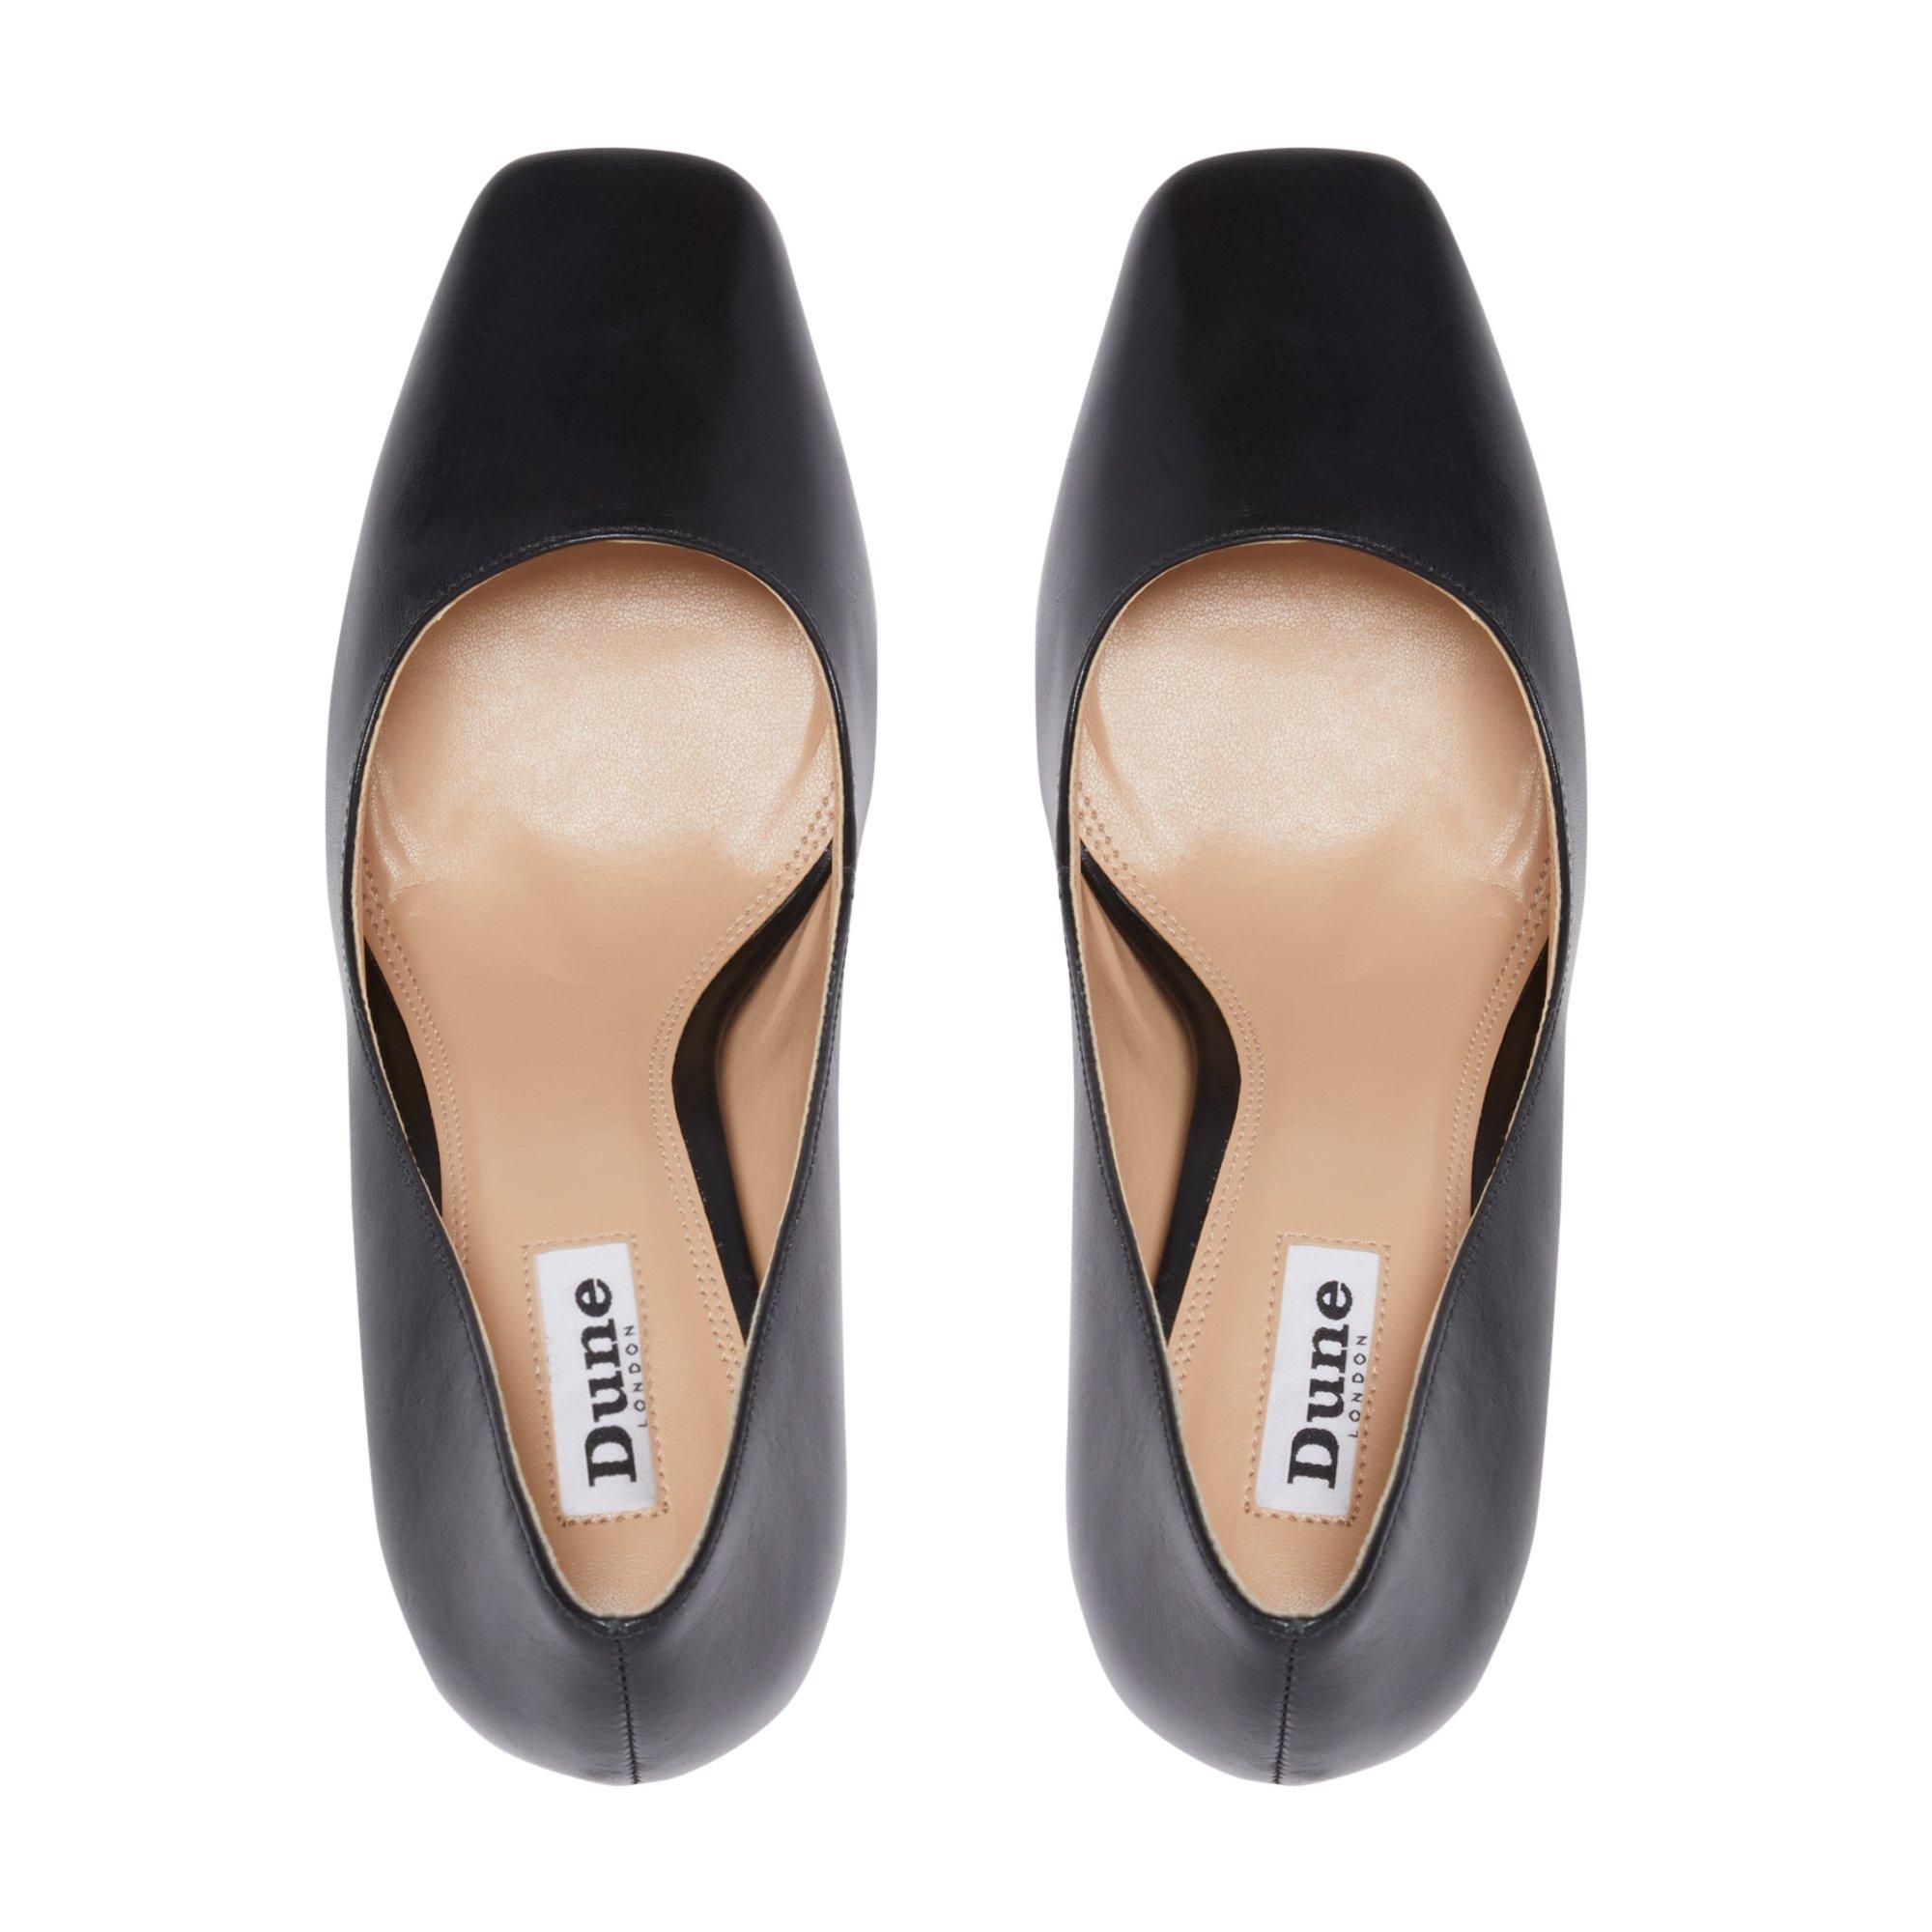 Meet Dune London's classic court with a twist. They're presented with a slender mid-heel stiletto and a square toe. Complete with a polished finish for a simple sharp, look.